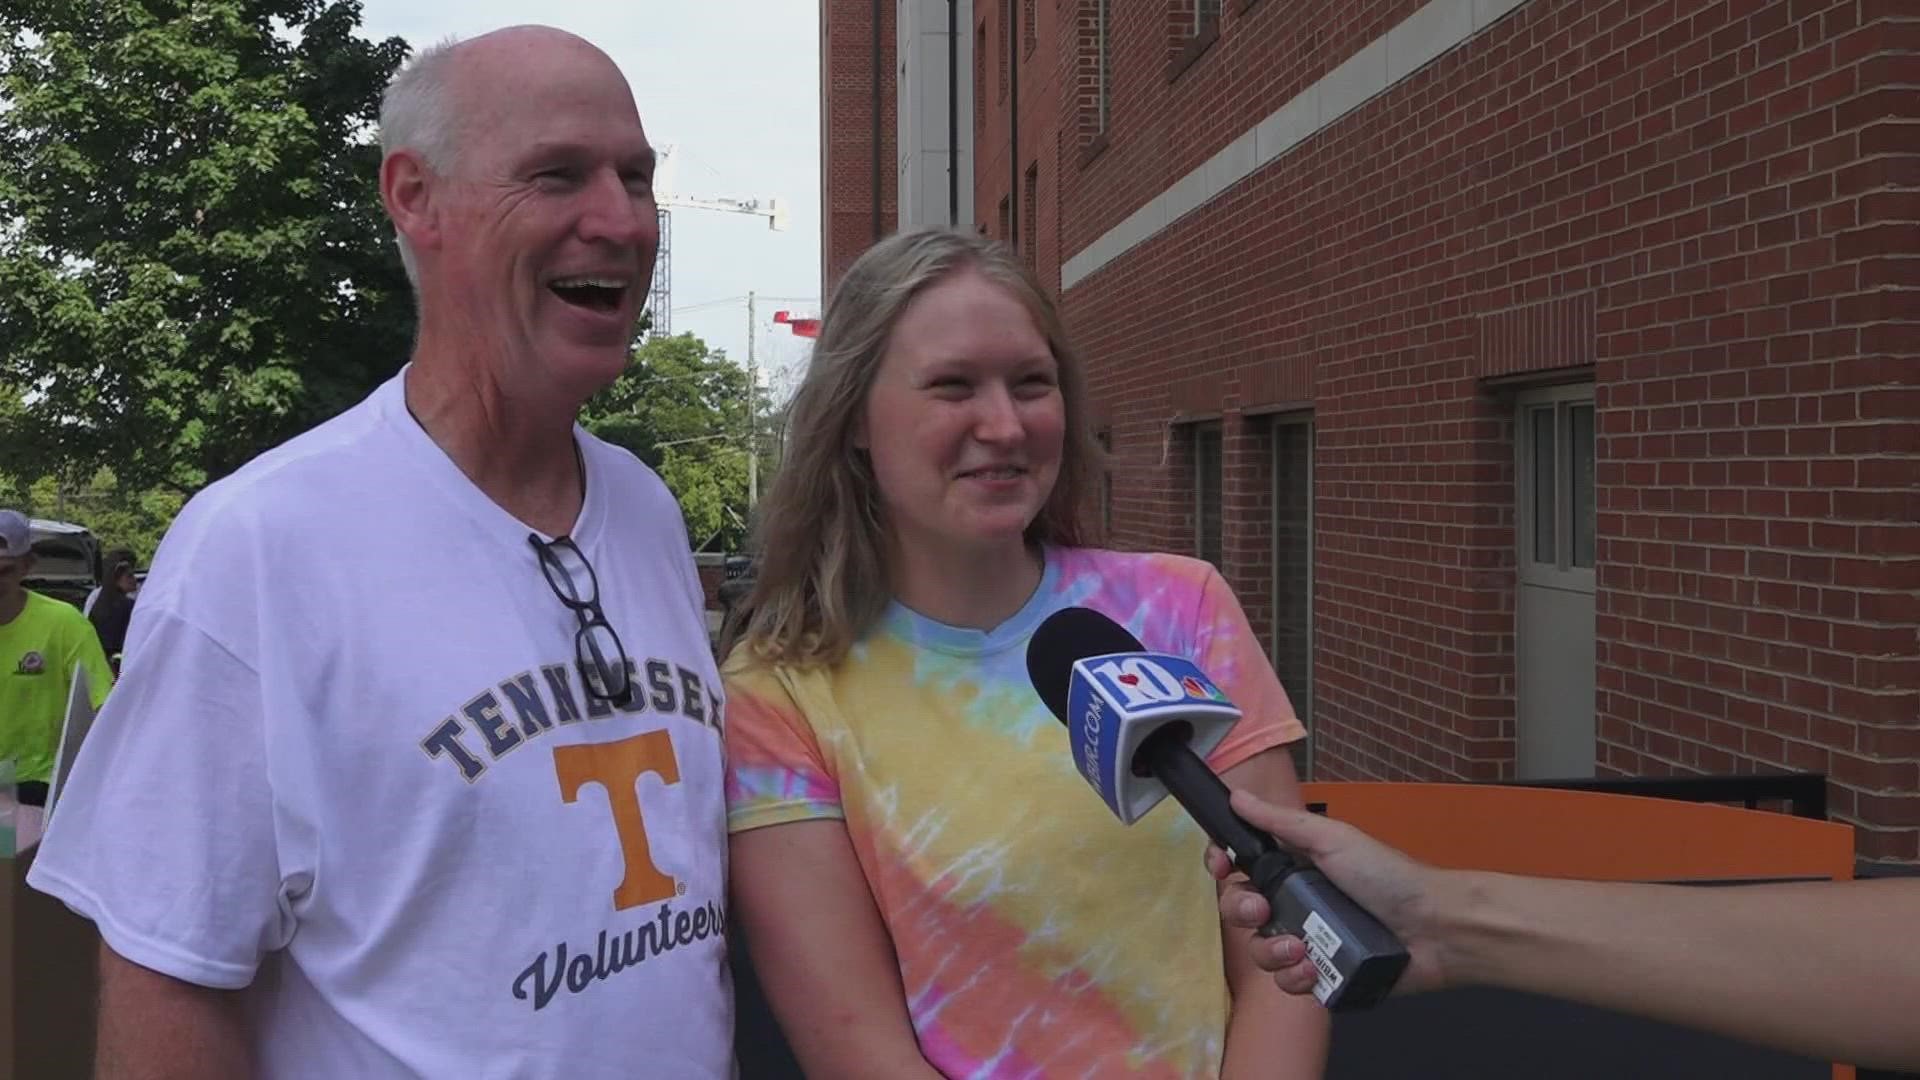 The University of Tennessee-Knoxville gets ready for new incoming students during move-in week.